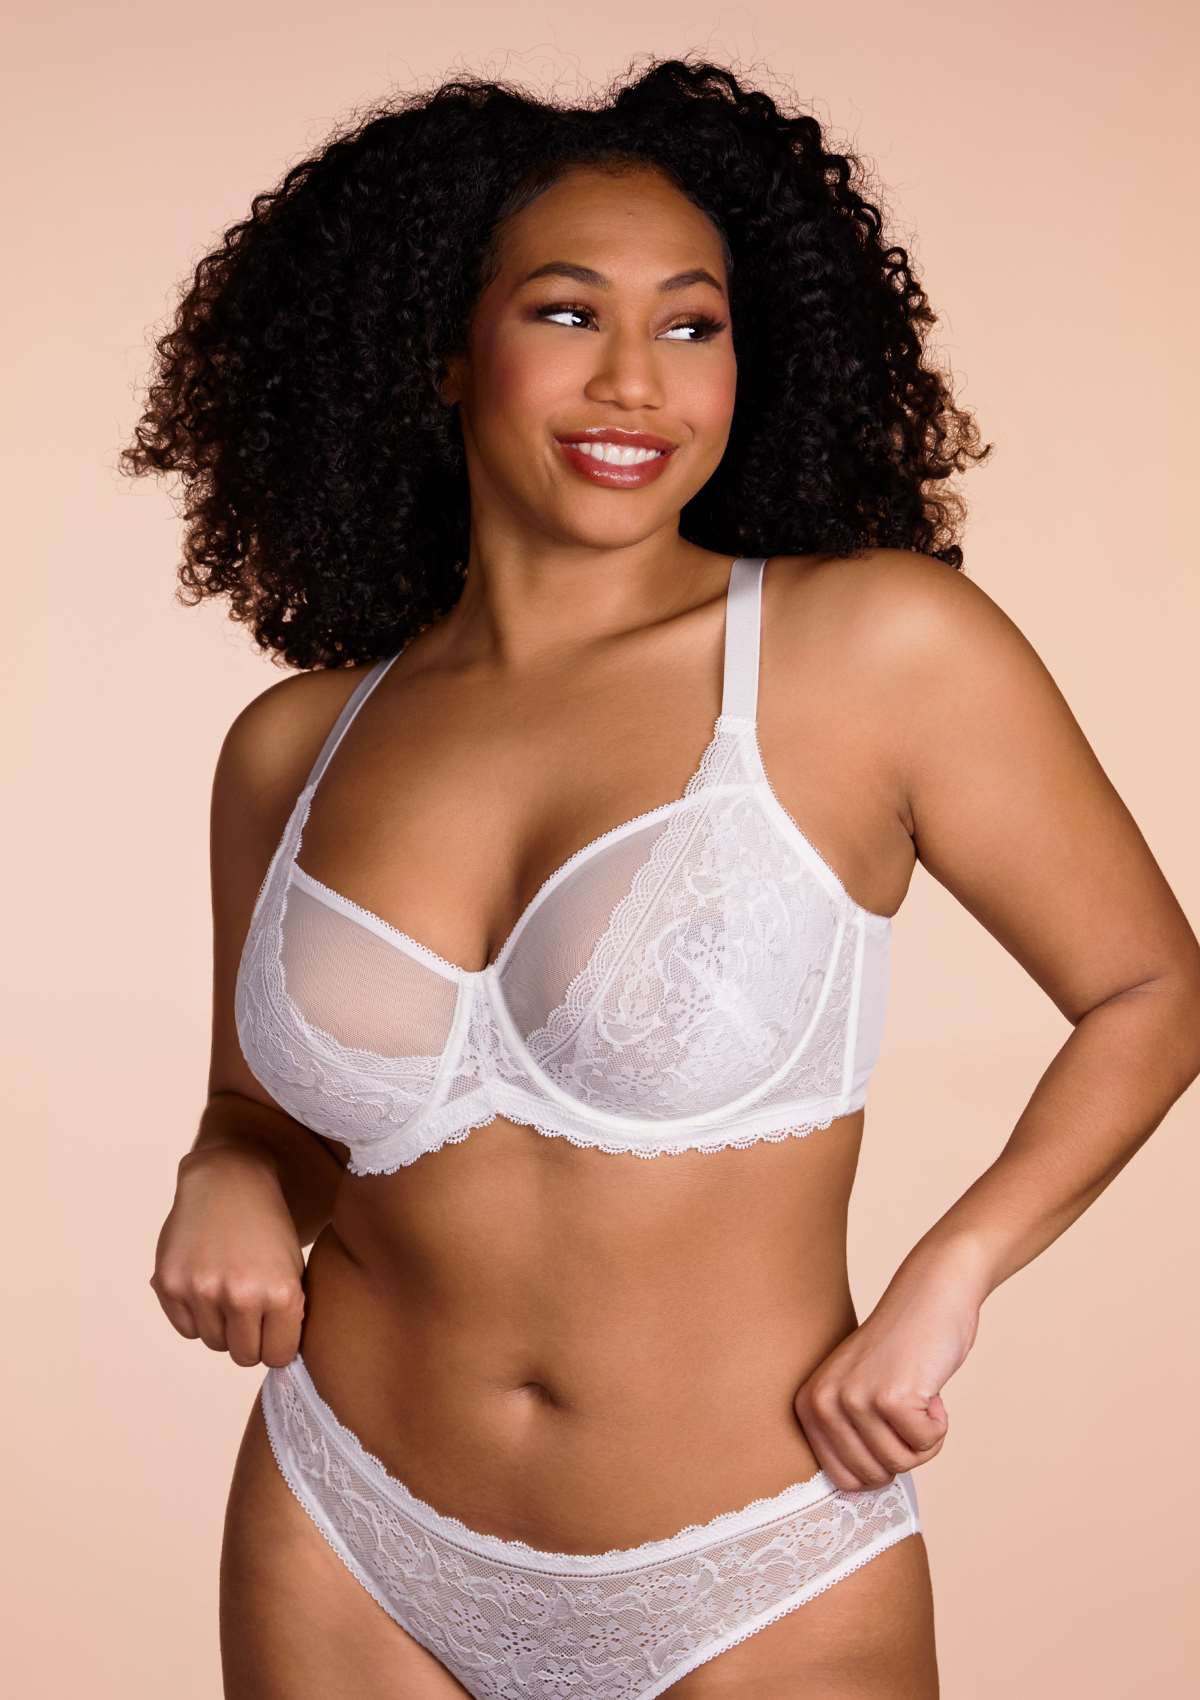 HSIA Anemone Big Bra: Best Bra For Lift And Support, Floral Bra - White / 34 / C